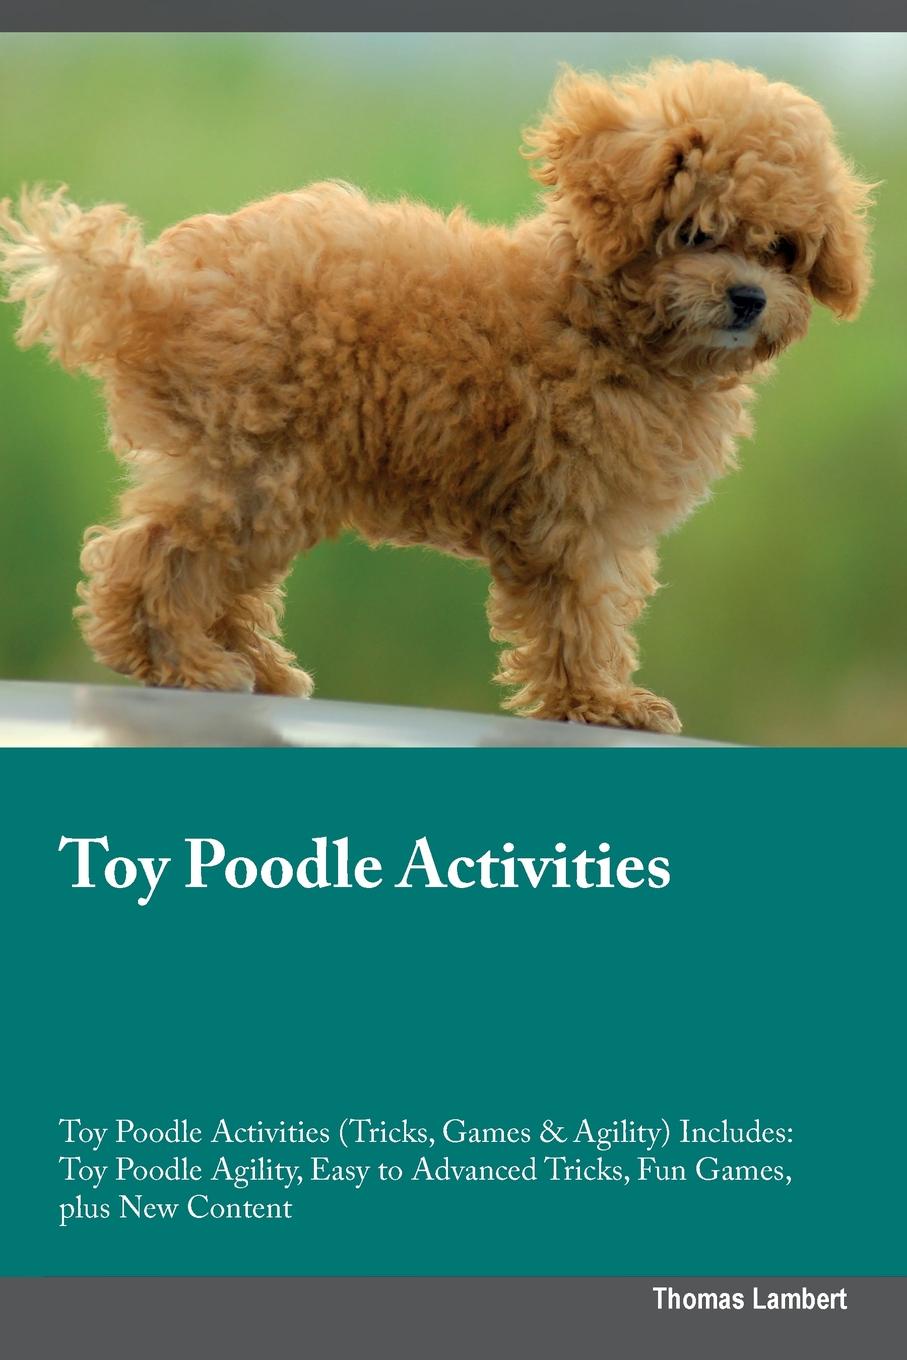 Toy Poodle Activities Toy Poodle Activities (Tricks, Games & Agility) Includes. Toy Poodle Agility, Easy to Advanced Tricks, Fun Games, plus New Content